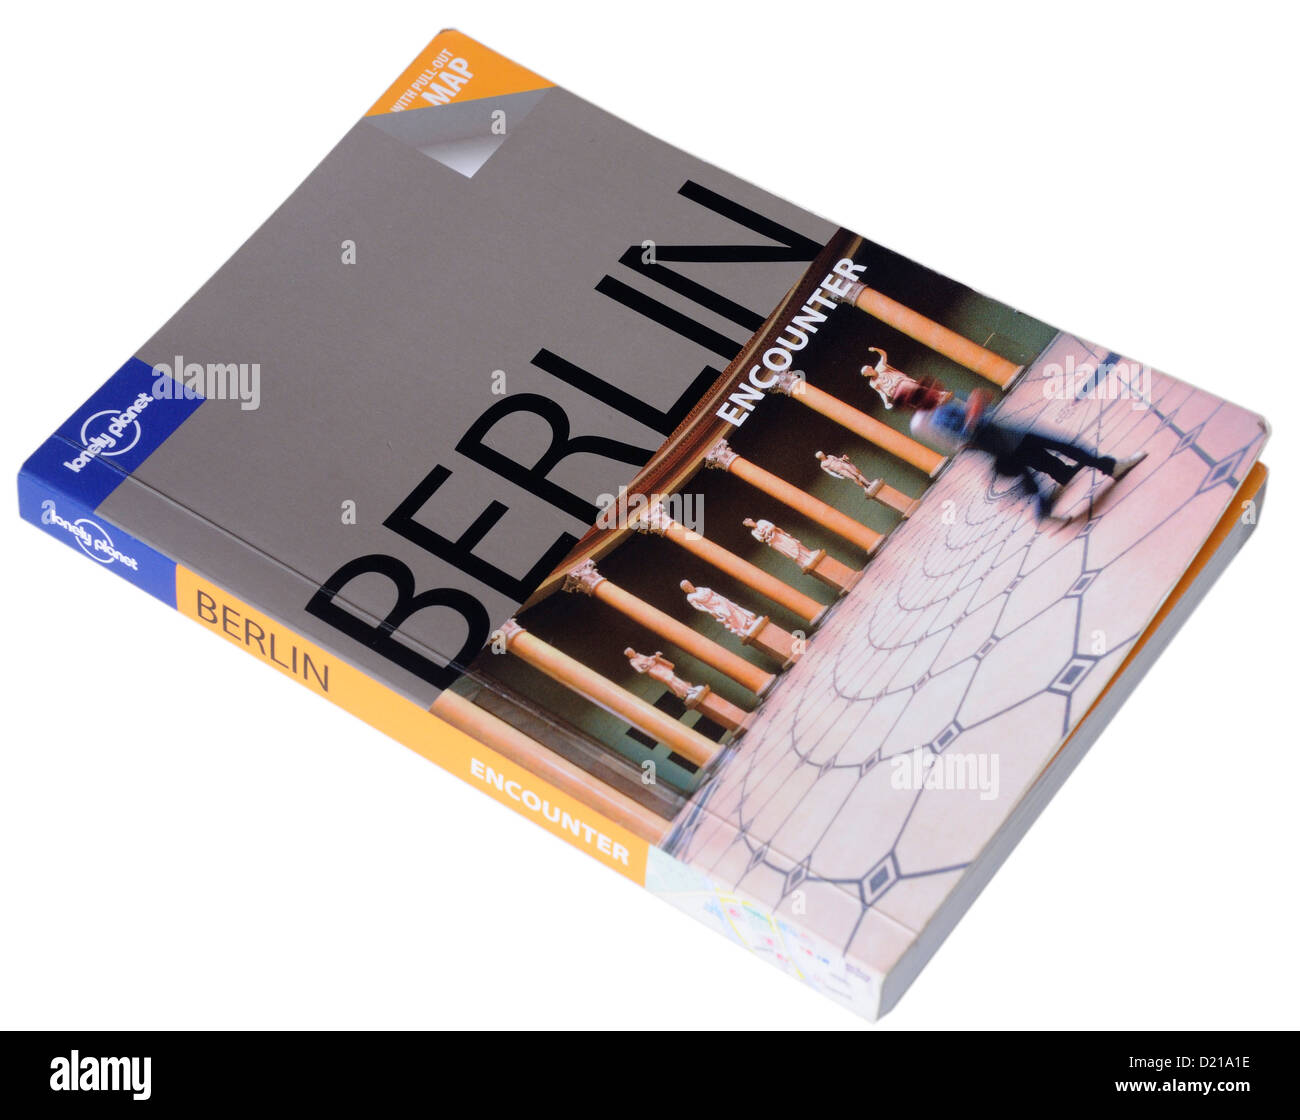 Der Lonely Planet City Guide Berlin Stockfoto